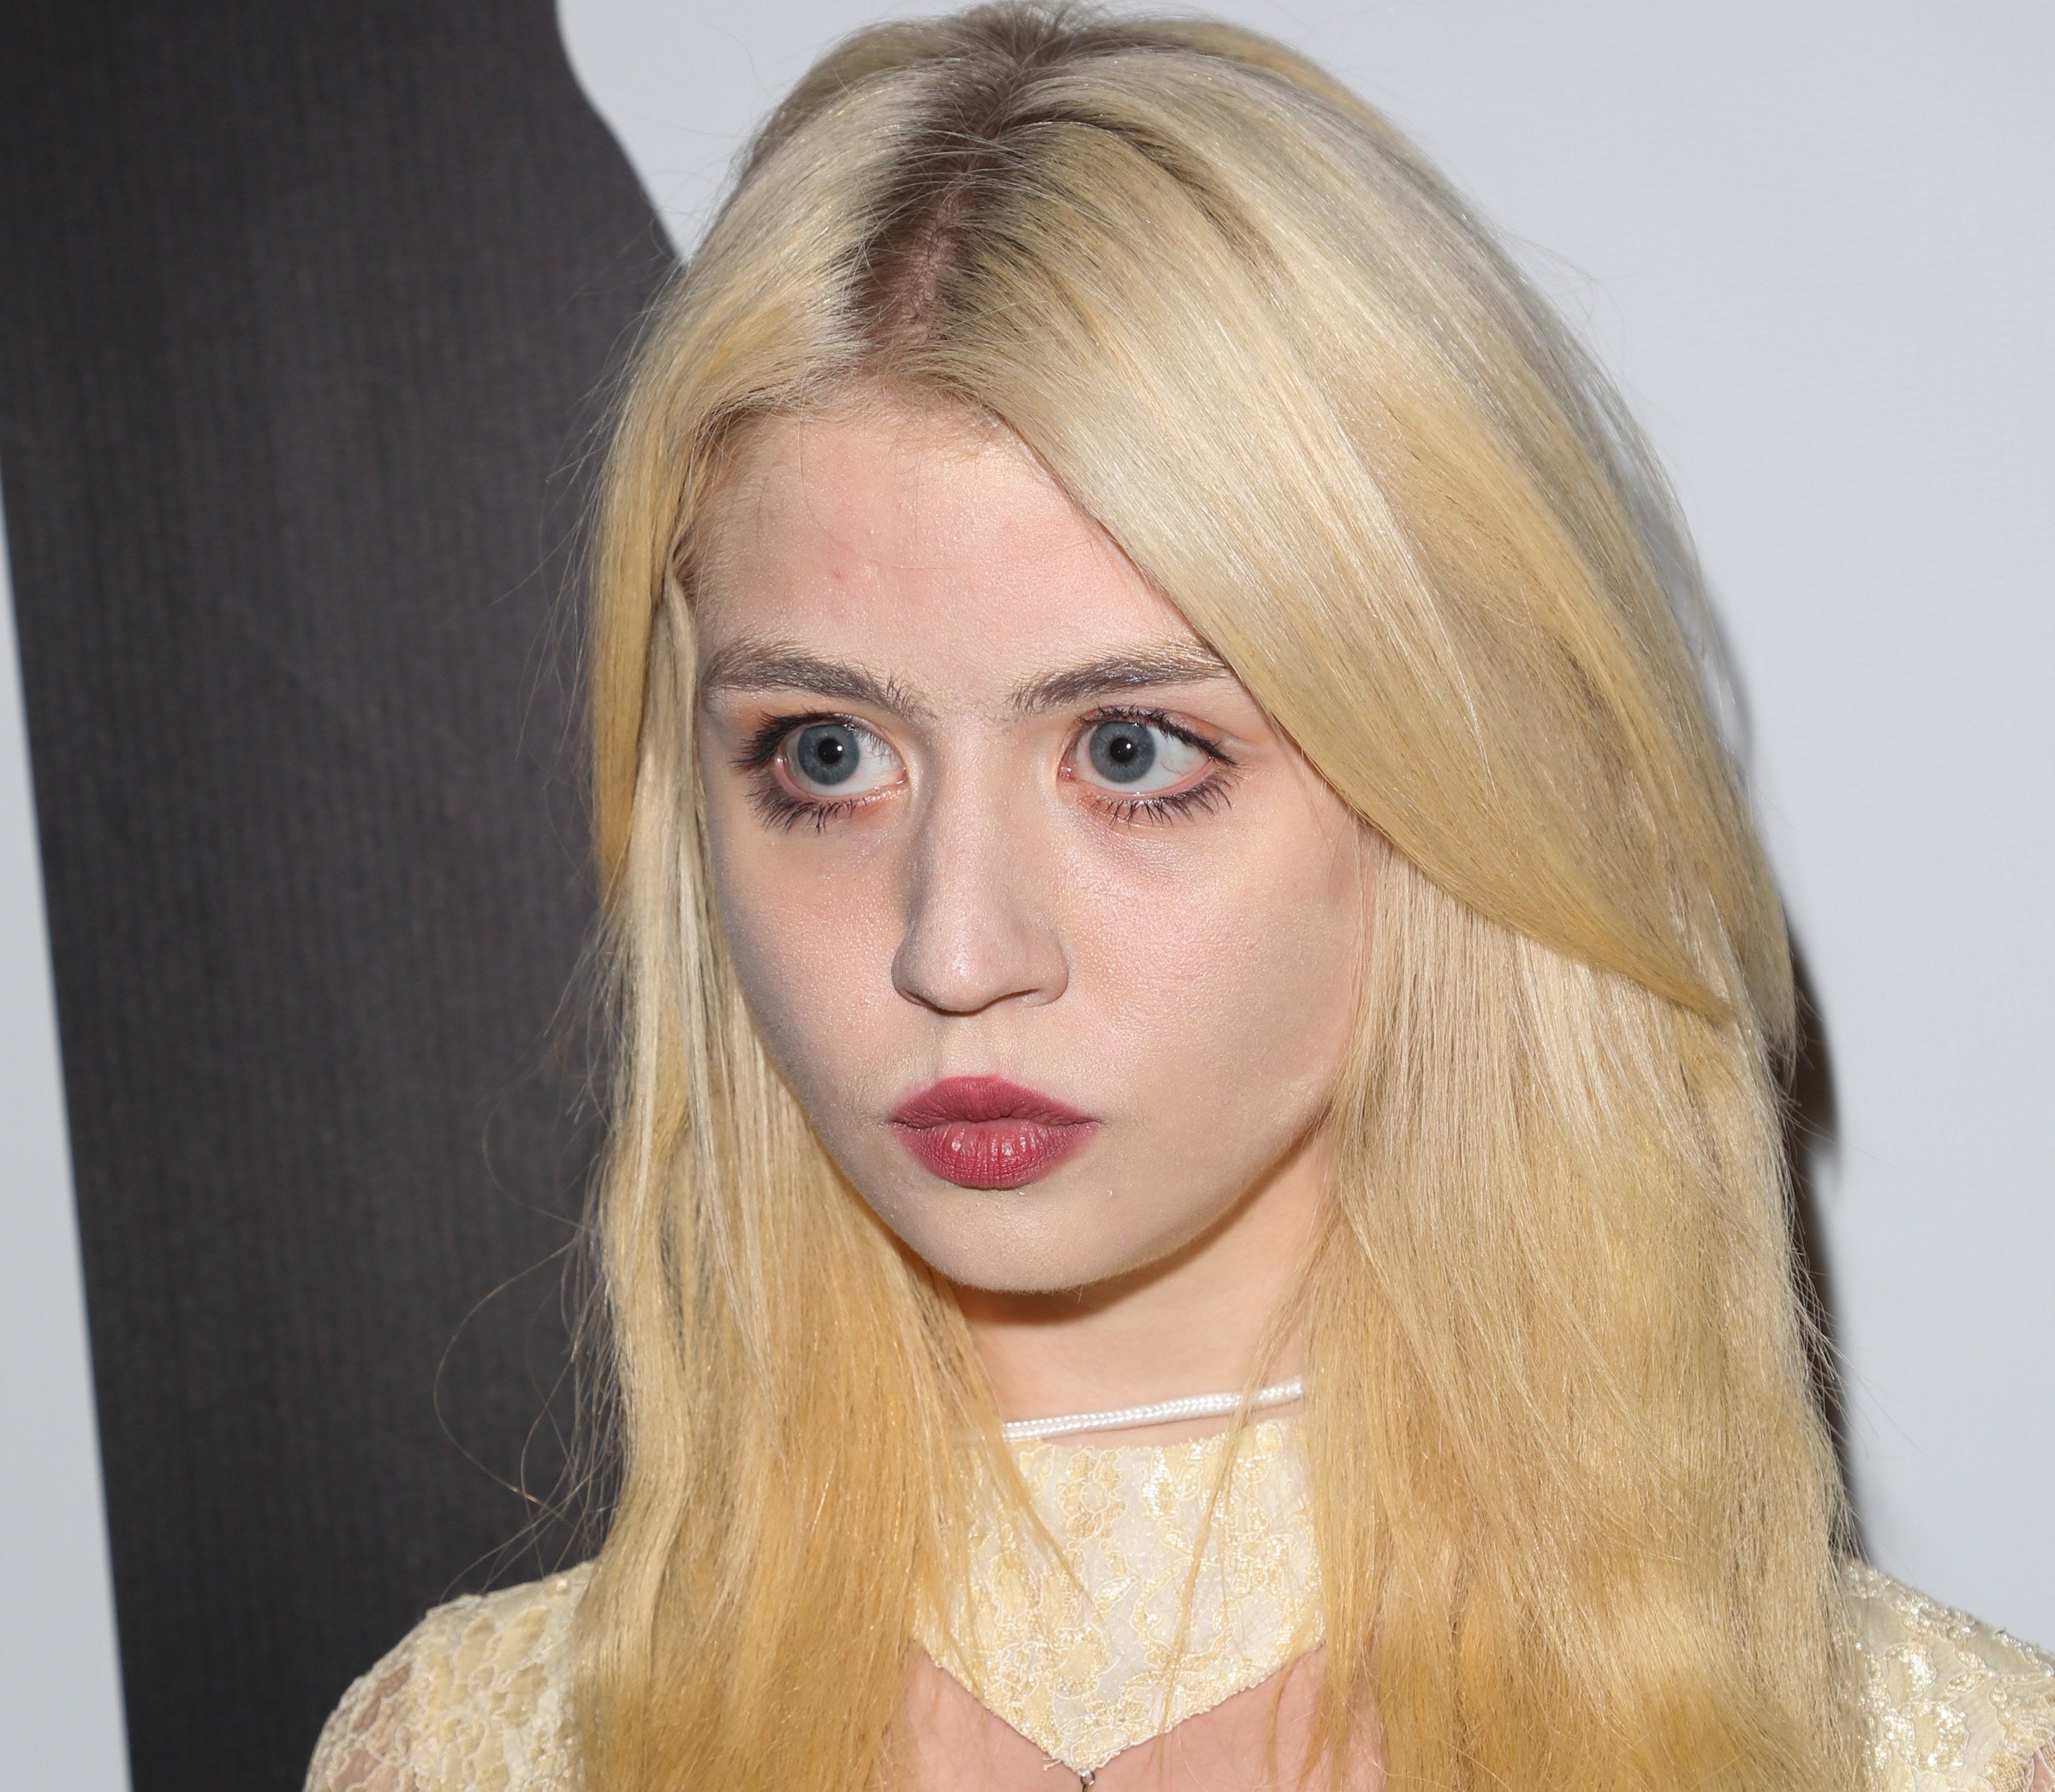 Allison Harvard at a wrap party